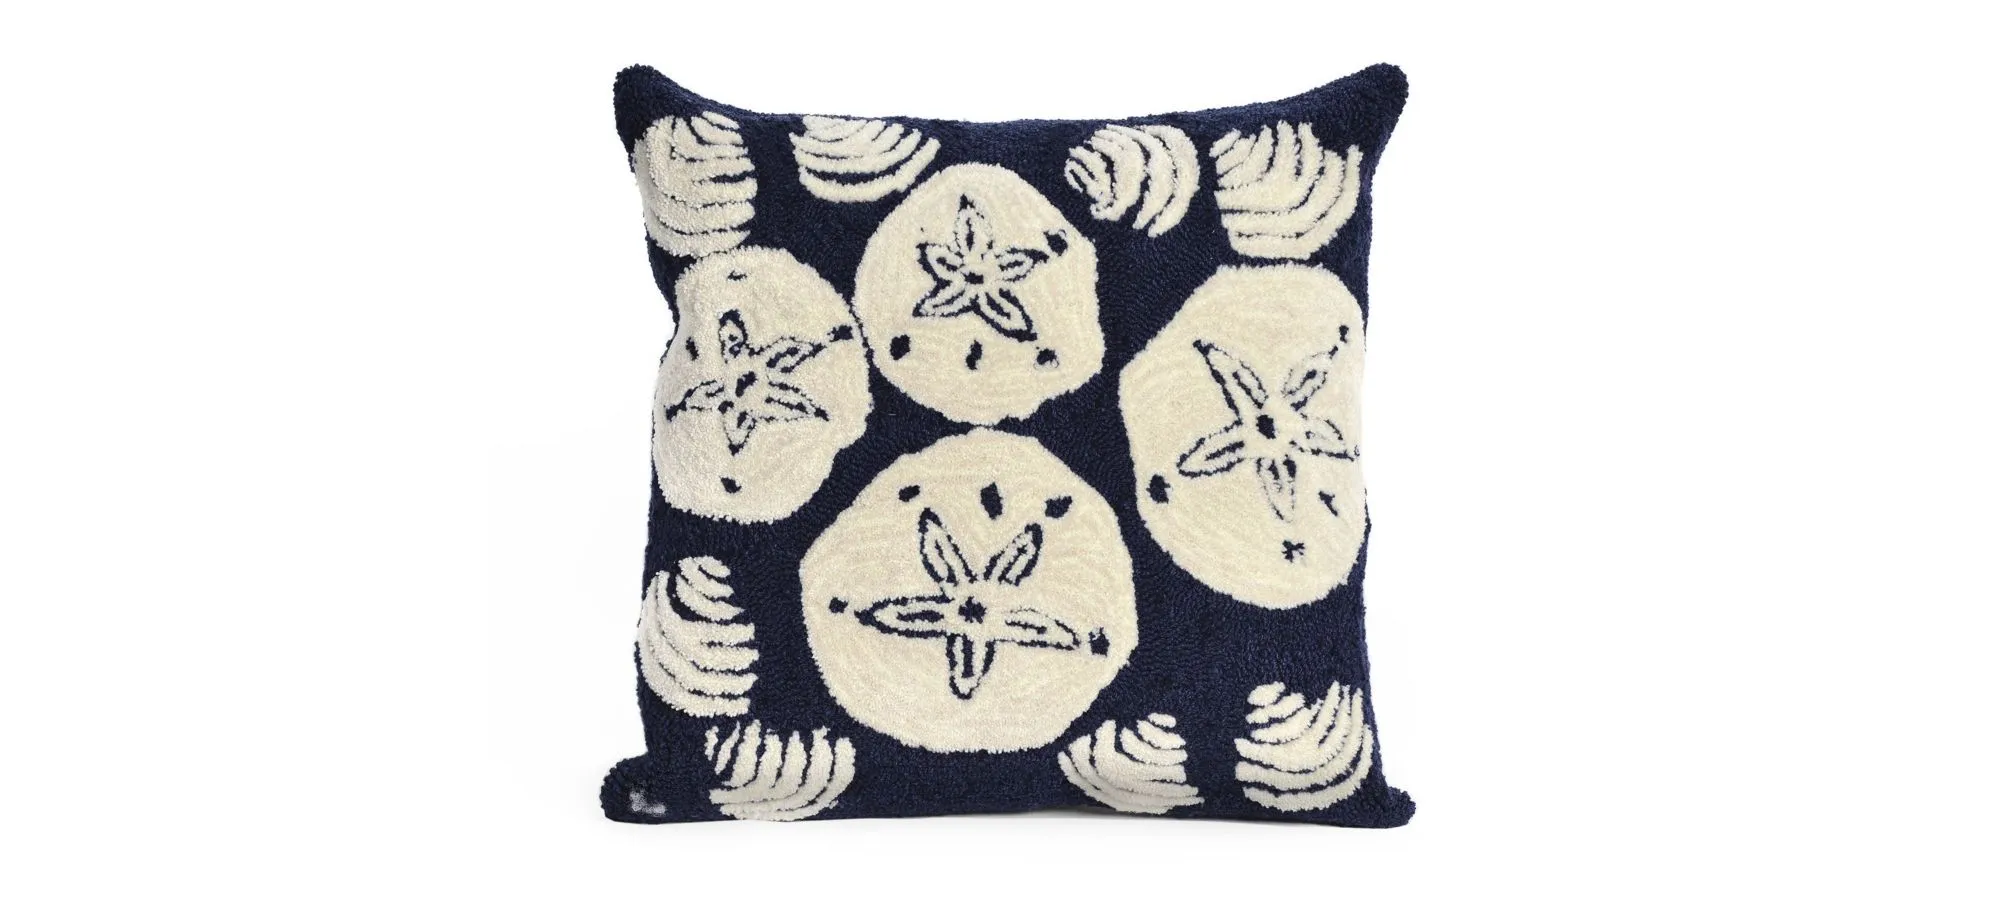 Liora Manne Frontporch Shell Toss Pillow in Navy by Trans-Ocean Import Co Inc